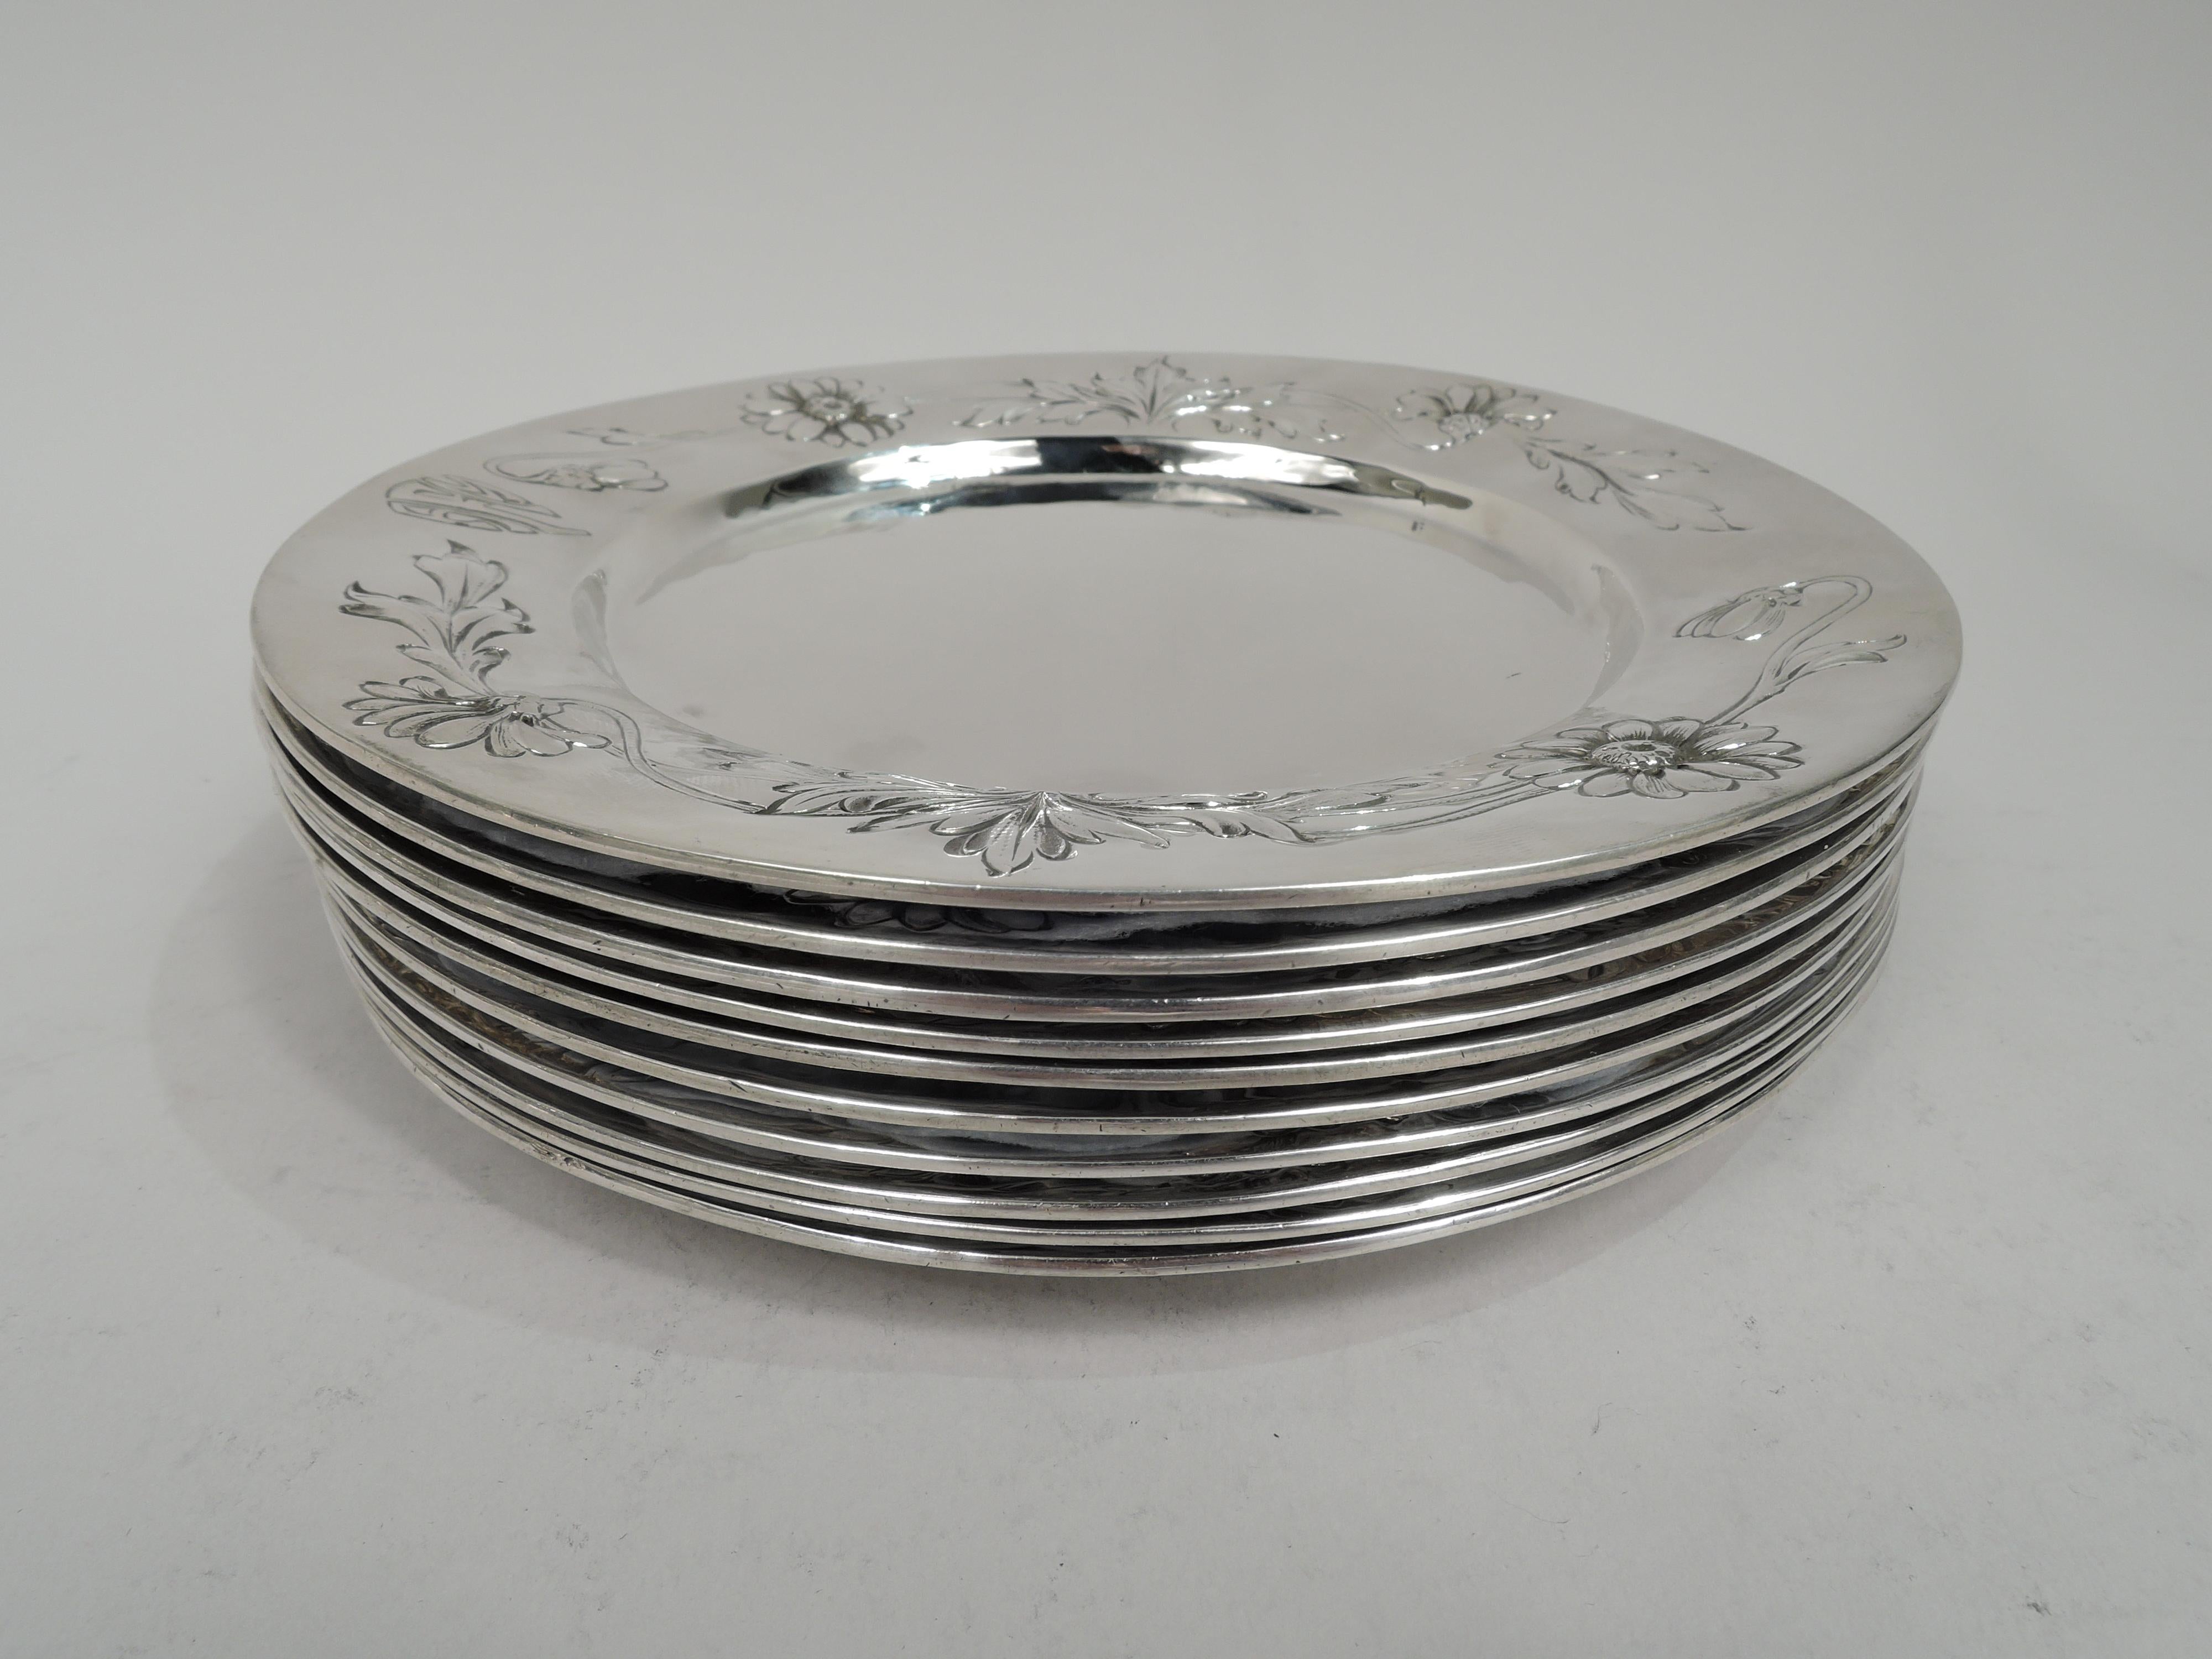 Set of 10 Art Nouveau Craftsman sterling silver bread and butter plates. Made by Lebolt & Co. in Chicago, ca 1910. Each: Round well and tapering shoulder with chased and engraved loose flowers and leaves as well as stylistically integrated 3-letter